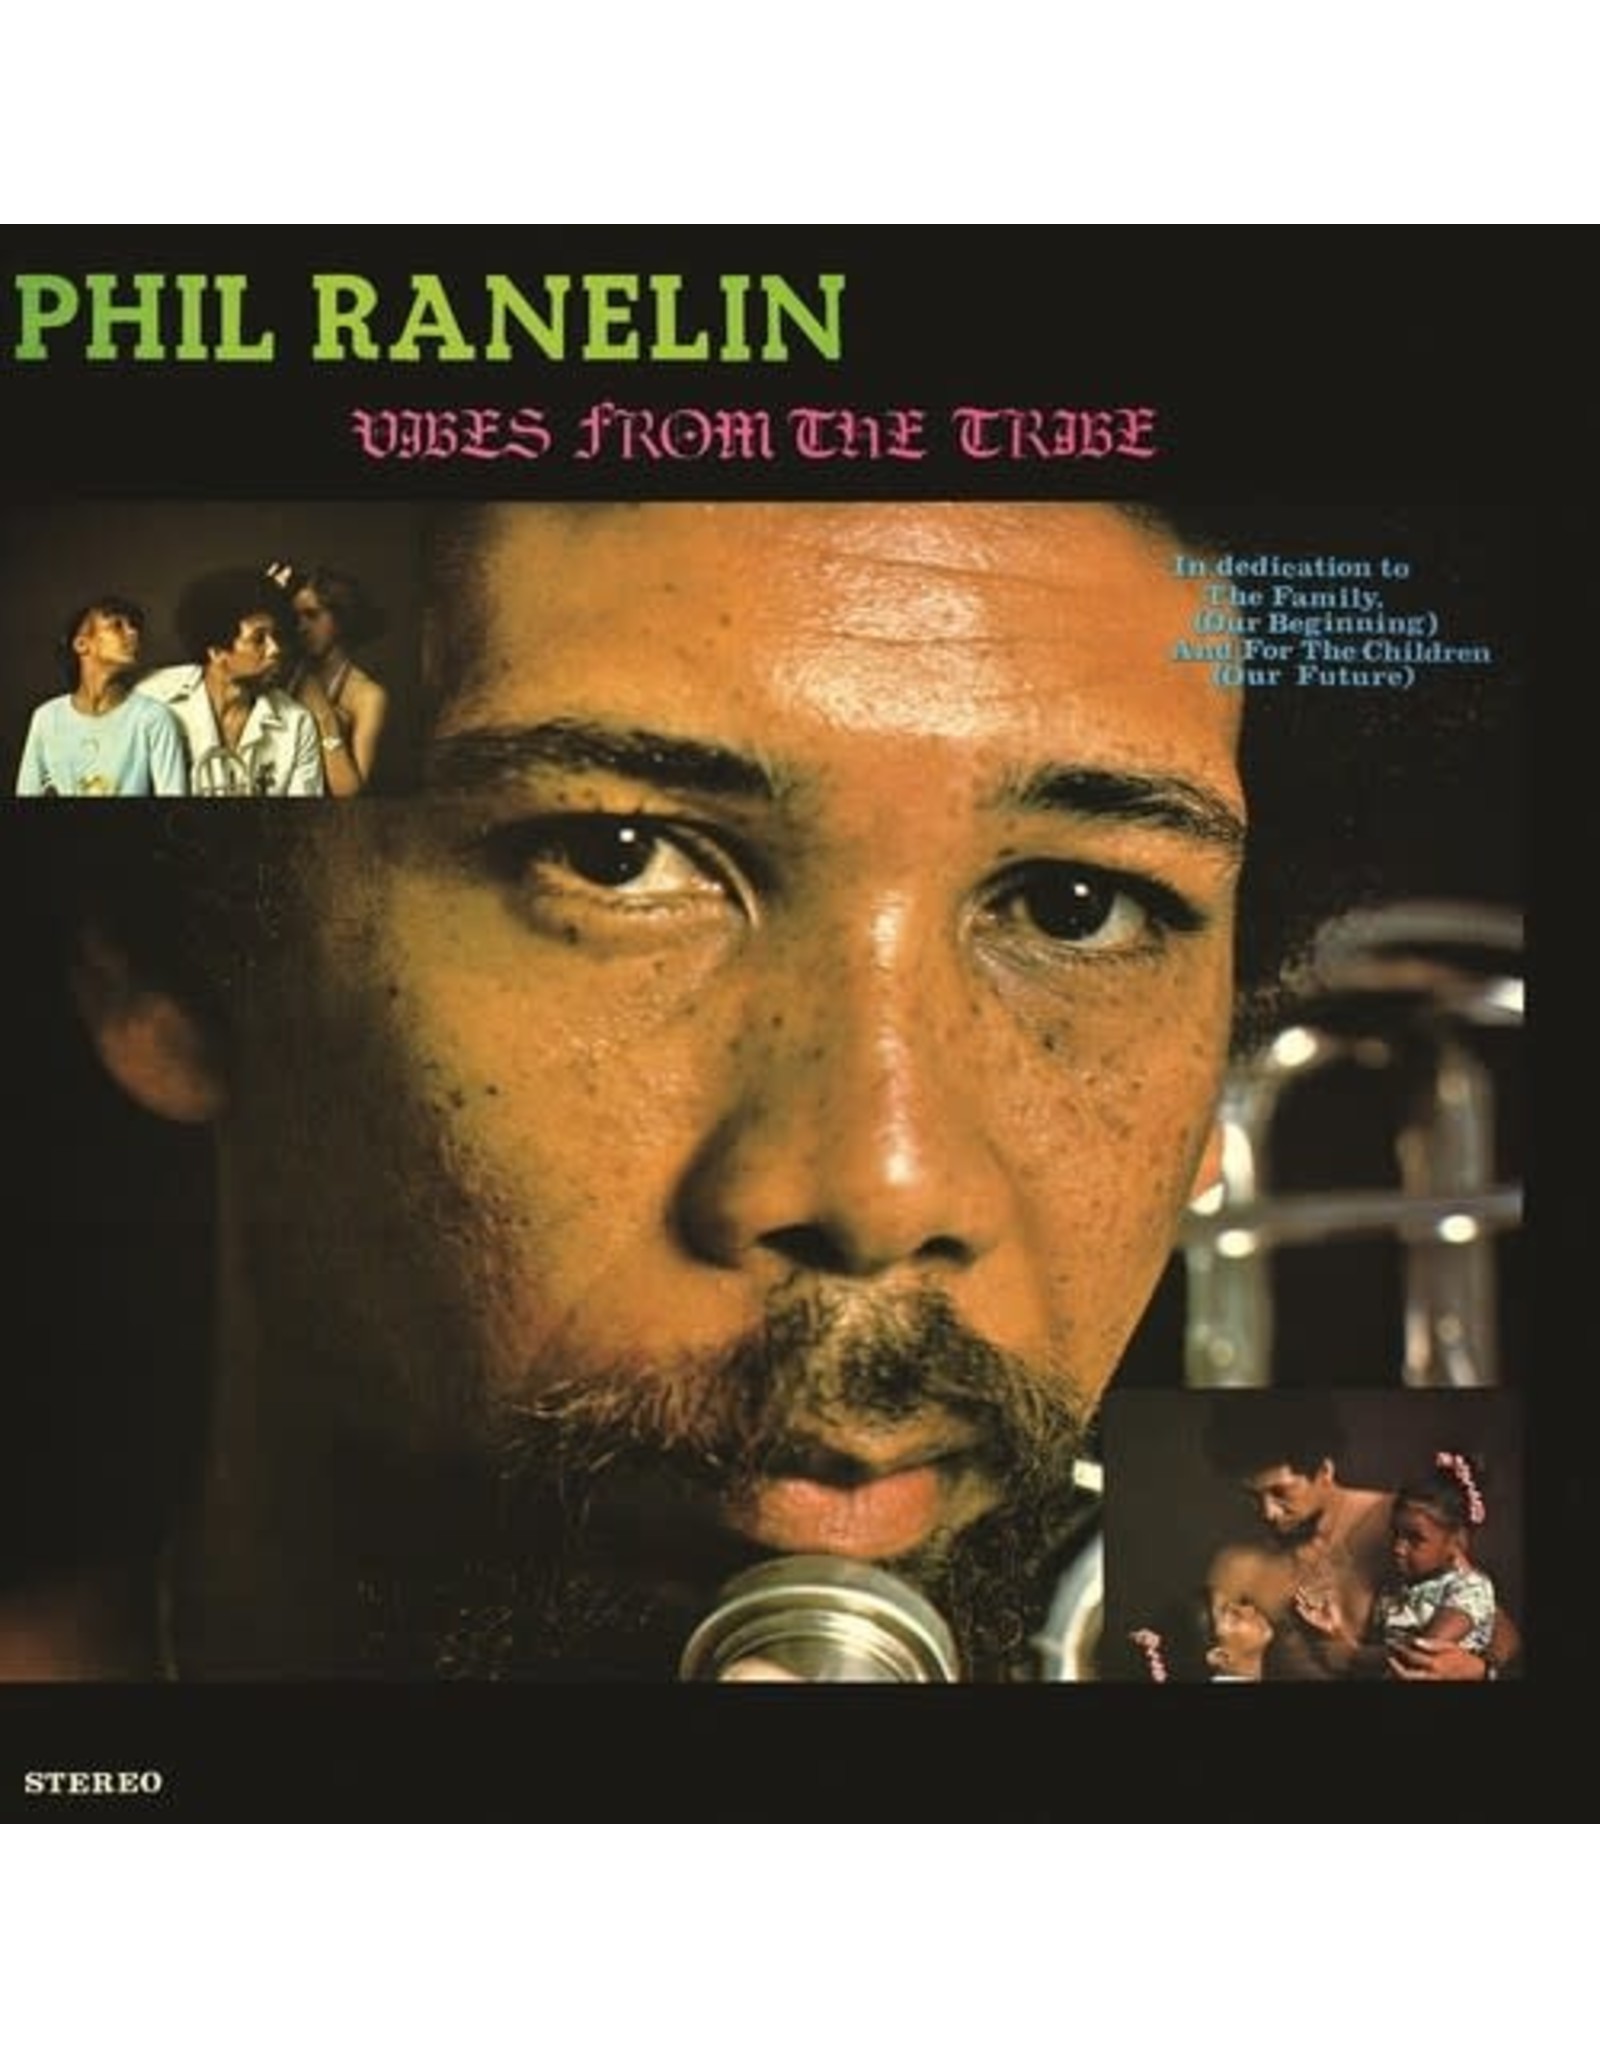 New Vinyl Phil Ranelin - Vibes From The Tribe LP